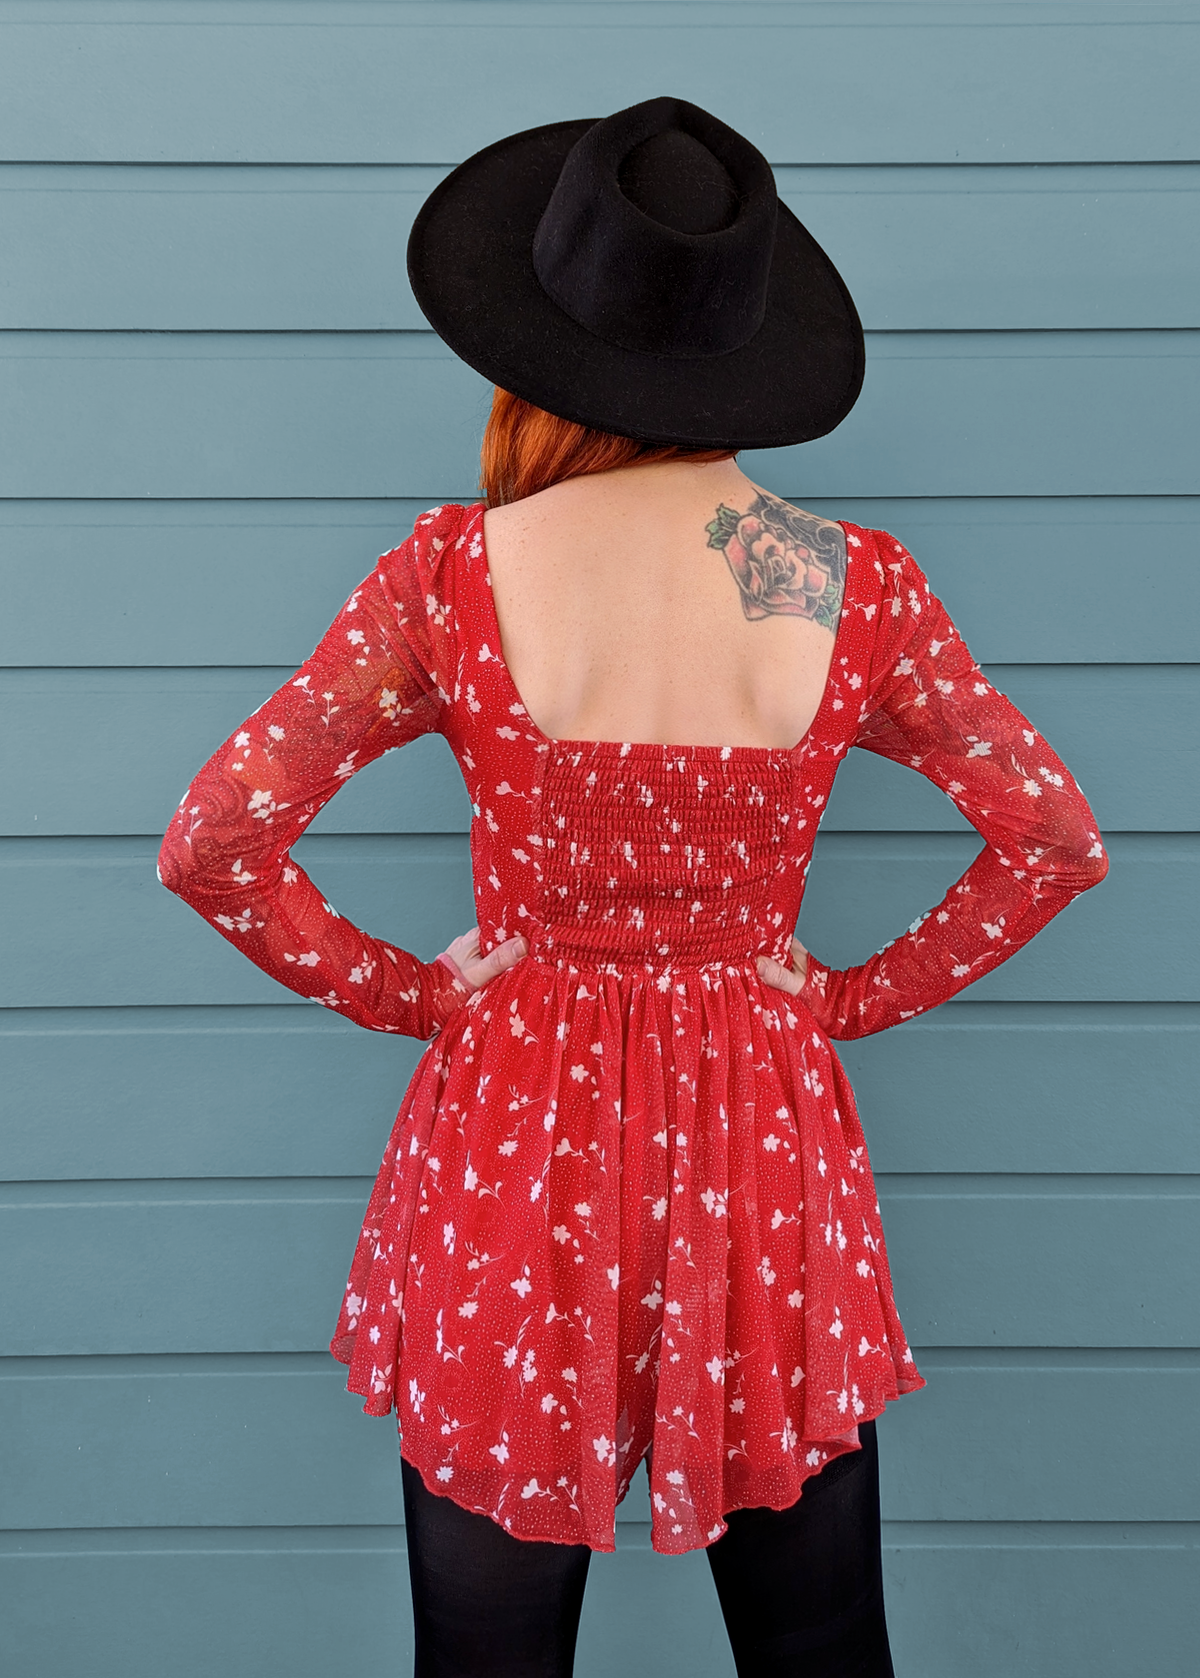 Slinky stretchy red and white floral long sleeve mesh jumpsuit playsuit romper by Glamorous UK